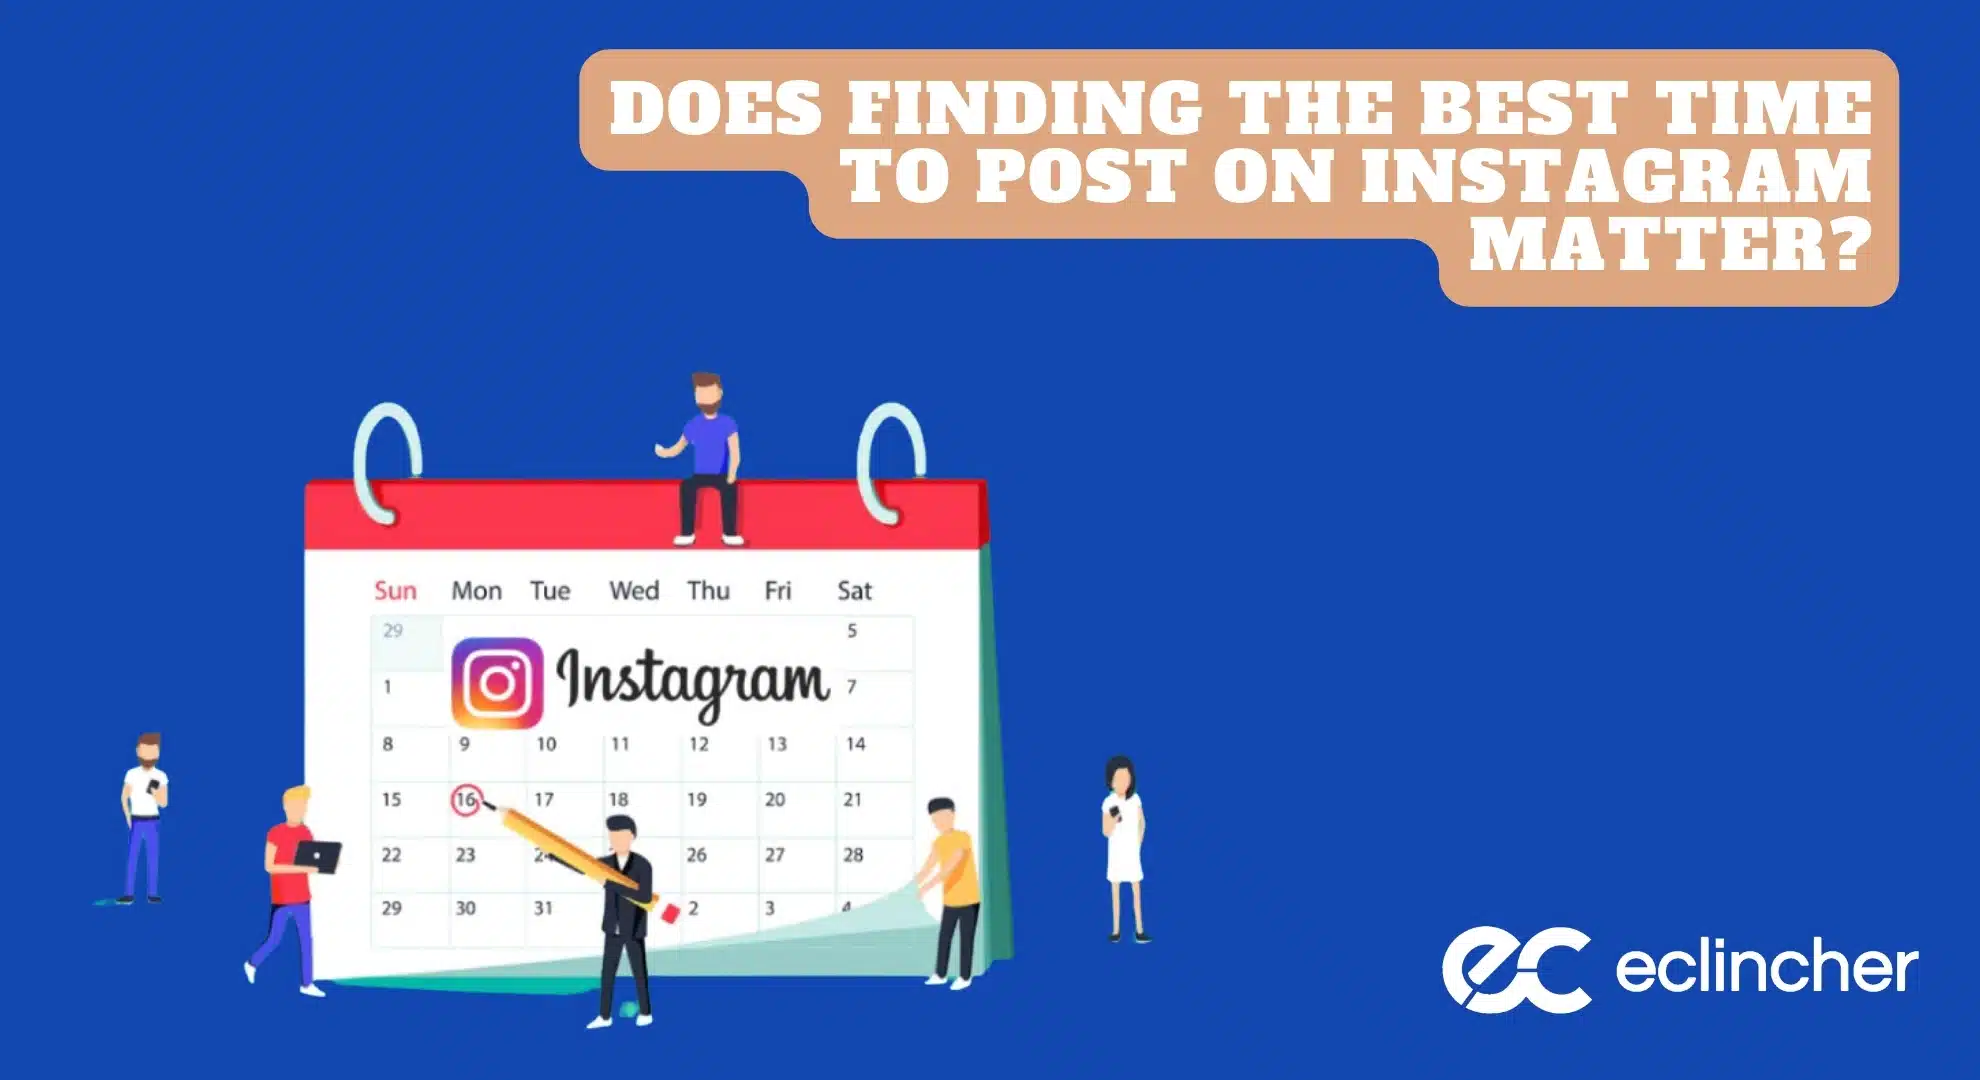 Does Finding the Best Time to Post on Instagram Matter